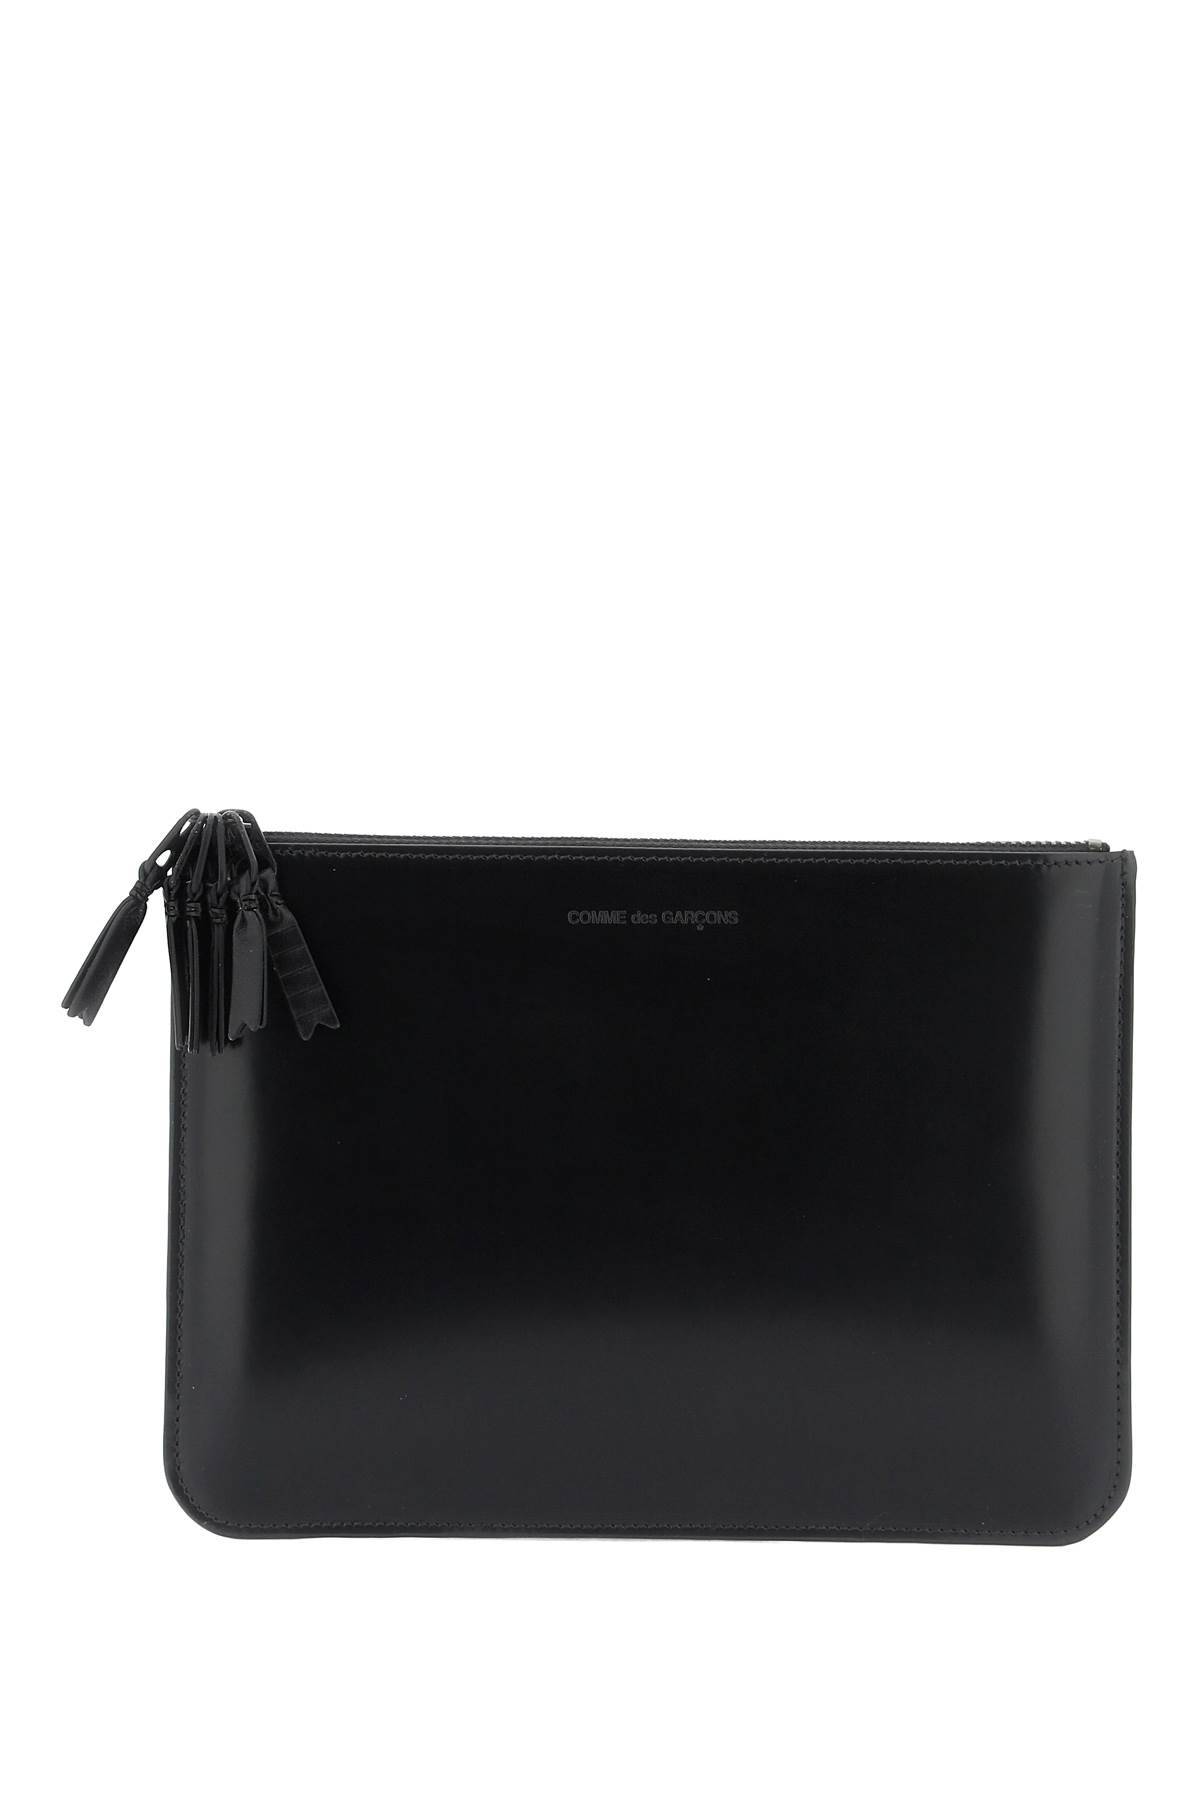 COMME DES GARCONS WALLET COMME DES GARCONS WALLET brushed leather multi-zip pouch with